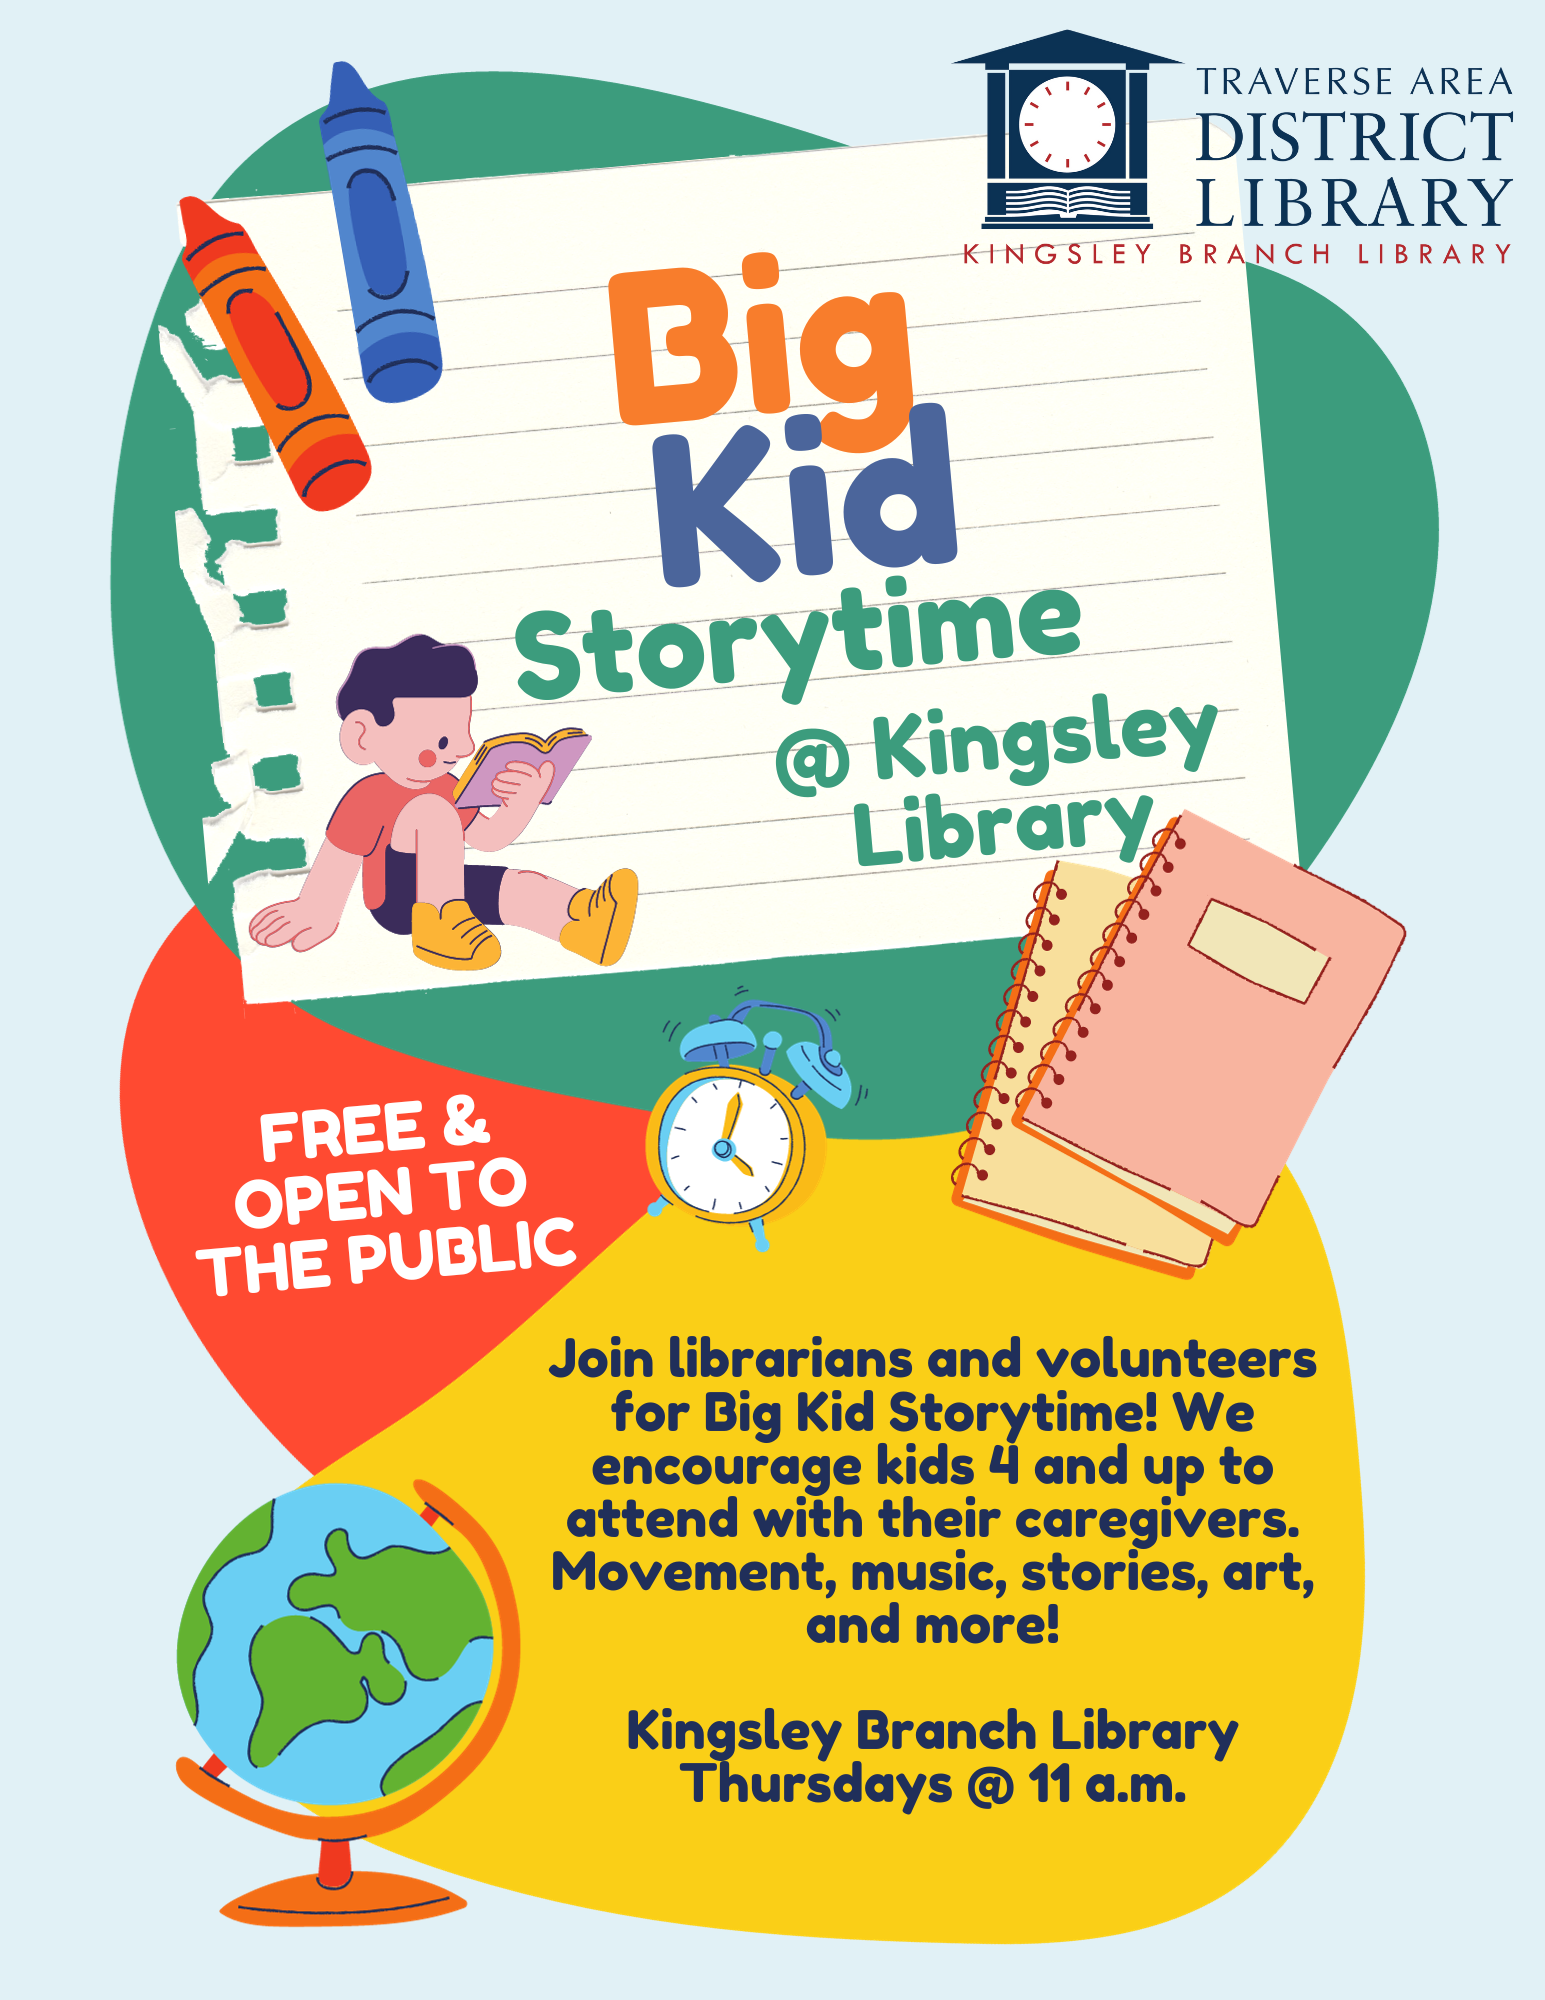 Text on flyer reads "Big Kid storytime, thursdays at 11 a.m. at Kingsley Branch Library." Image of a young boy reading, a world globe, and crayons appear next to the text.